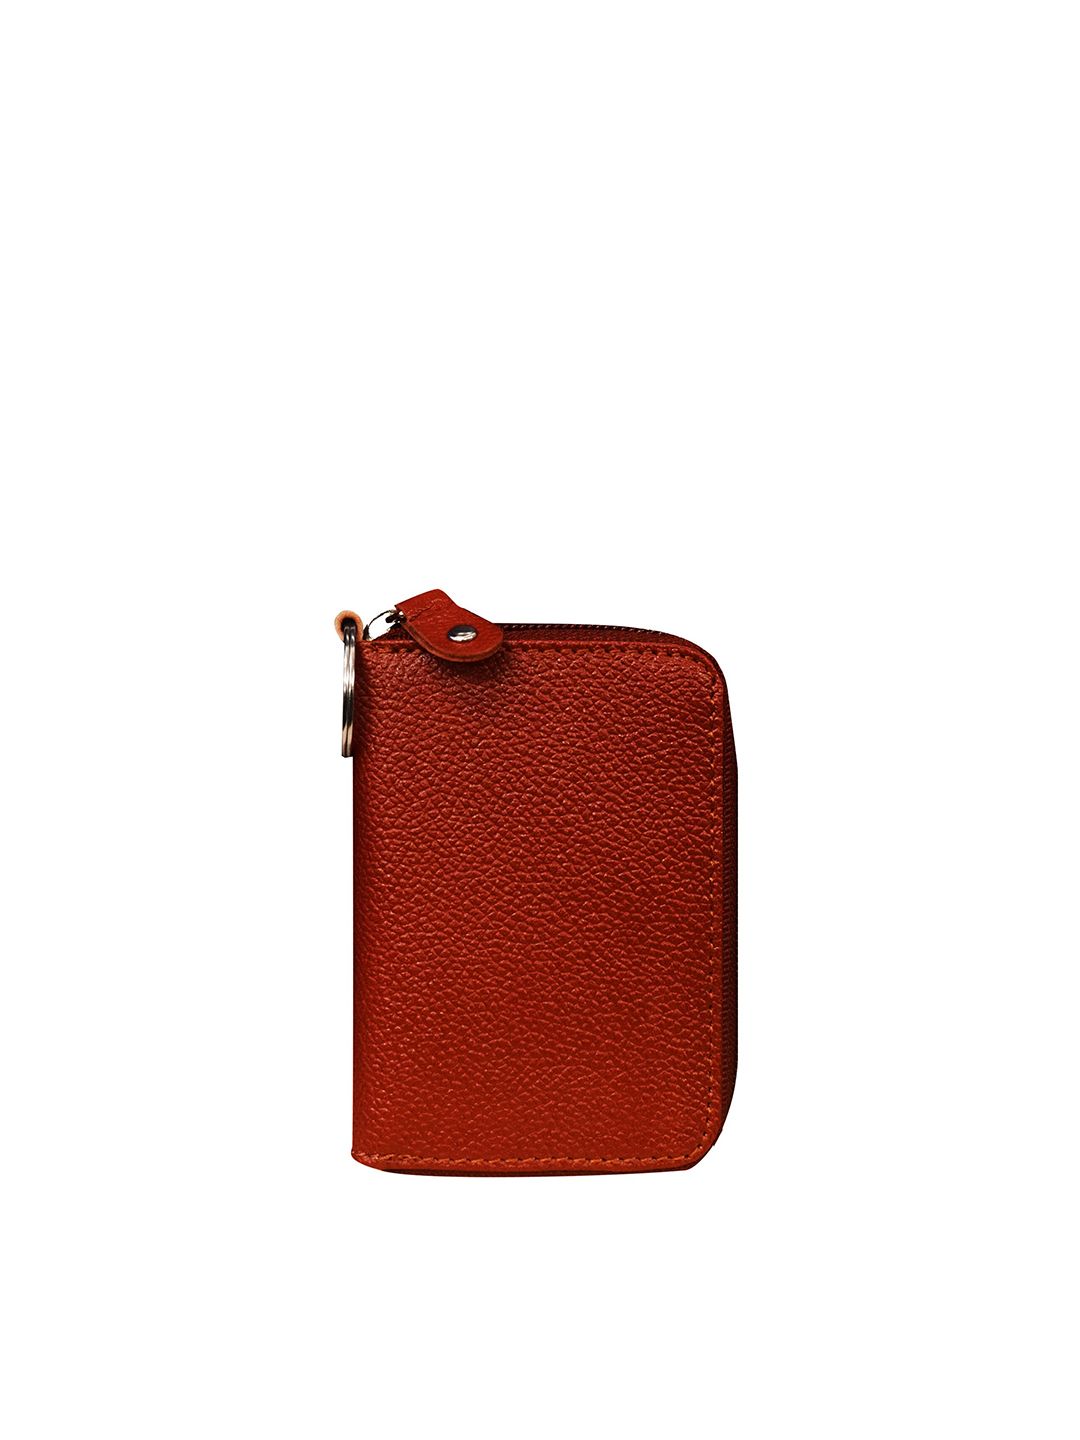 ABYS Unisex Maroon Leather Card Holder Price in India